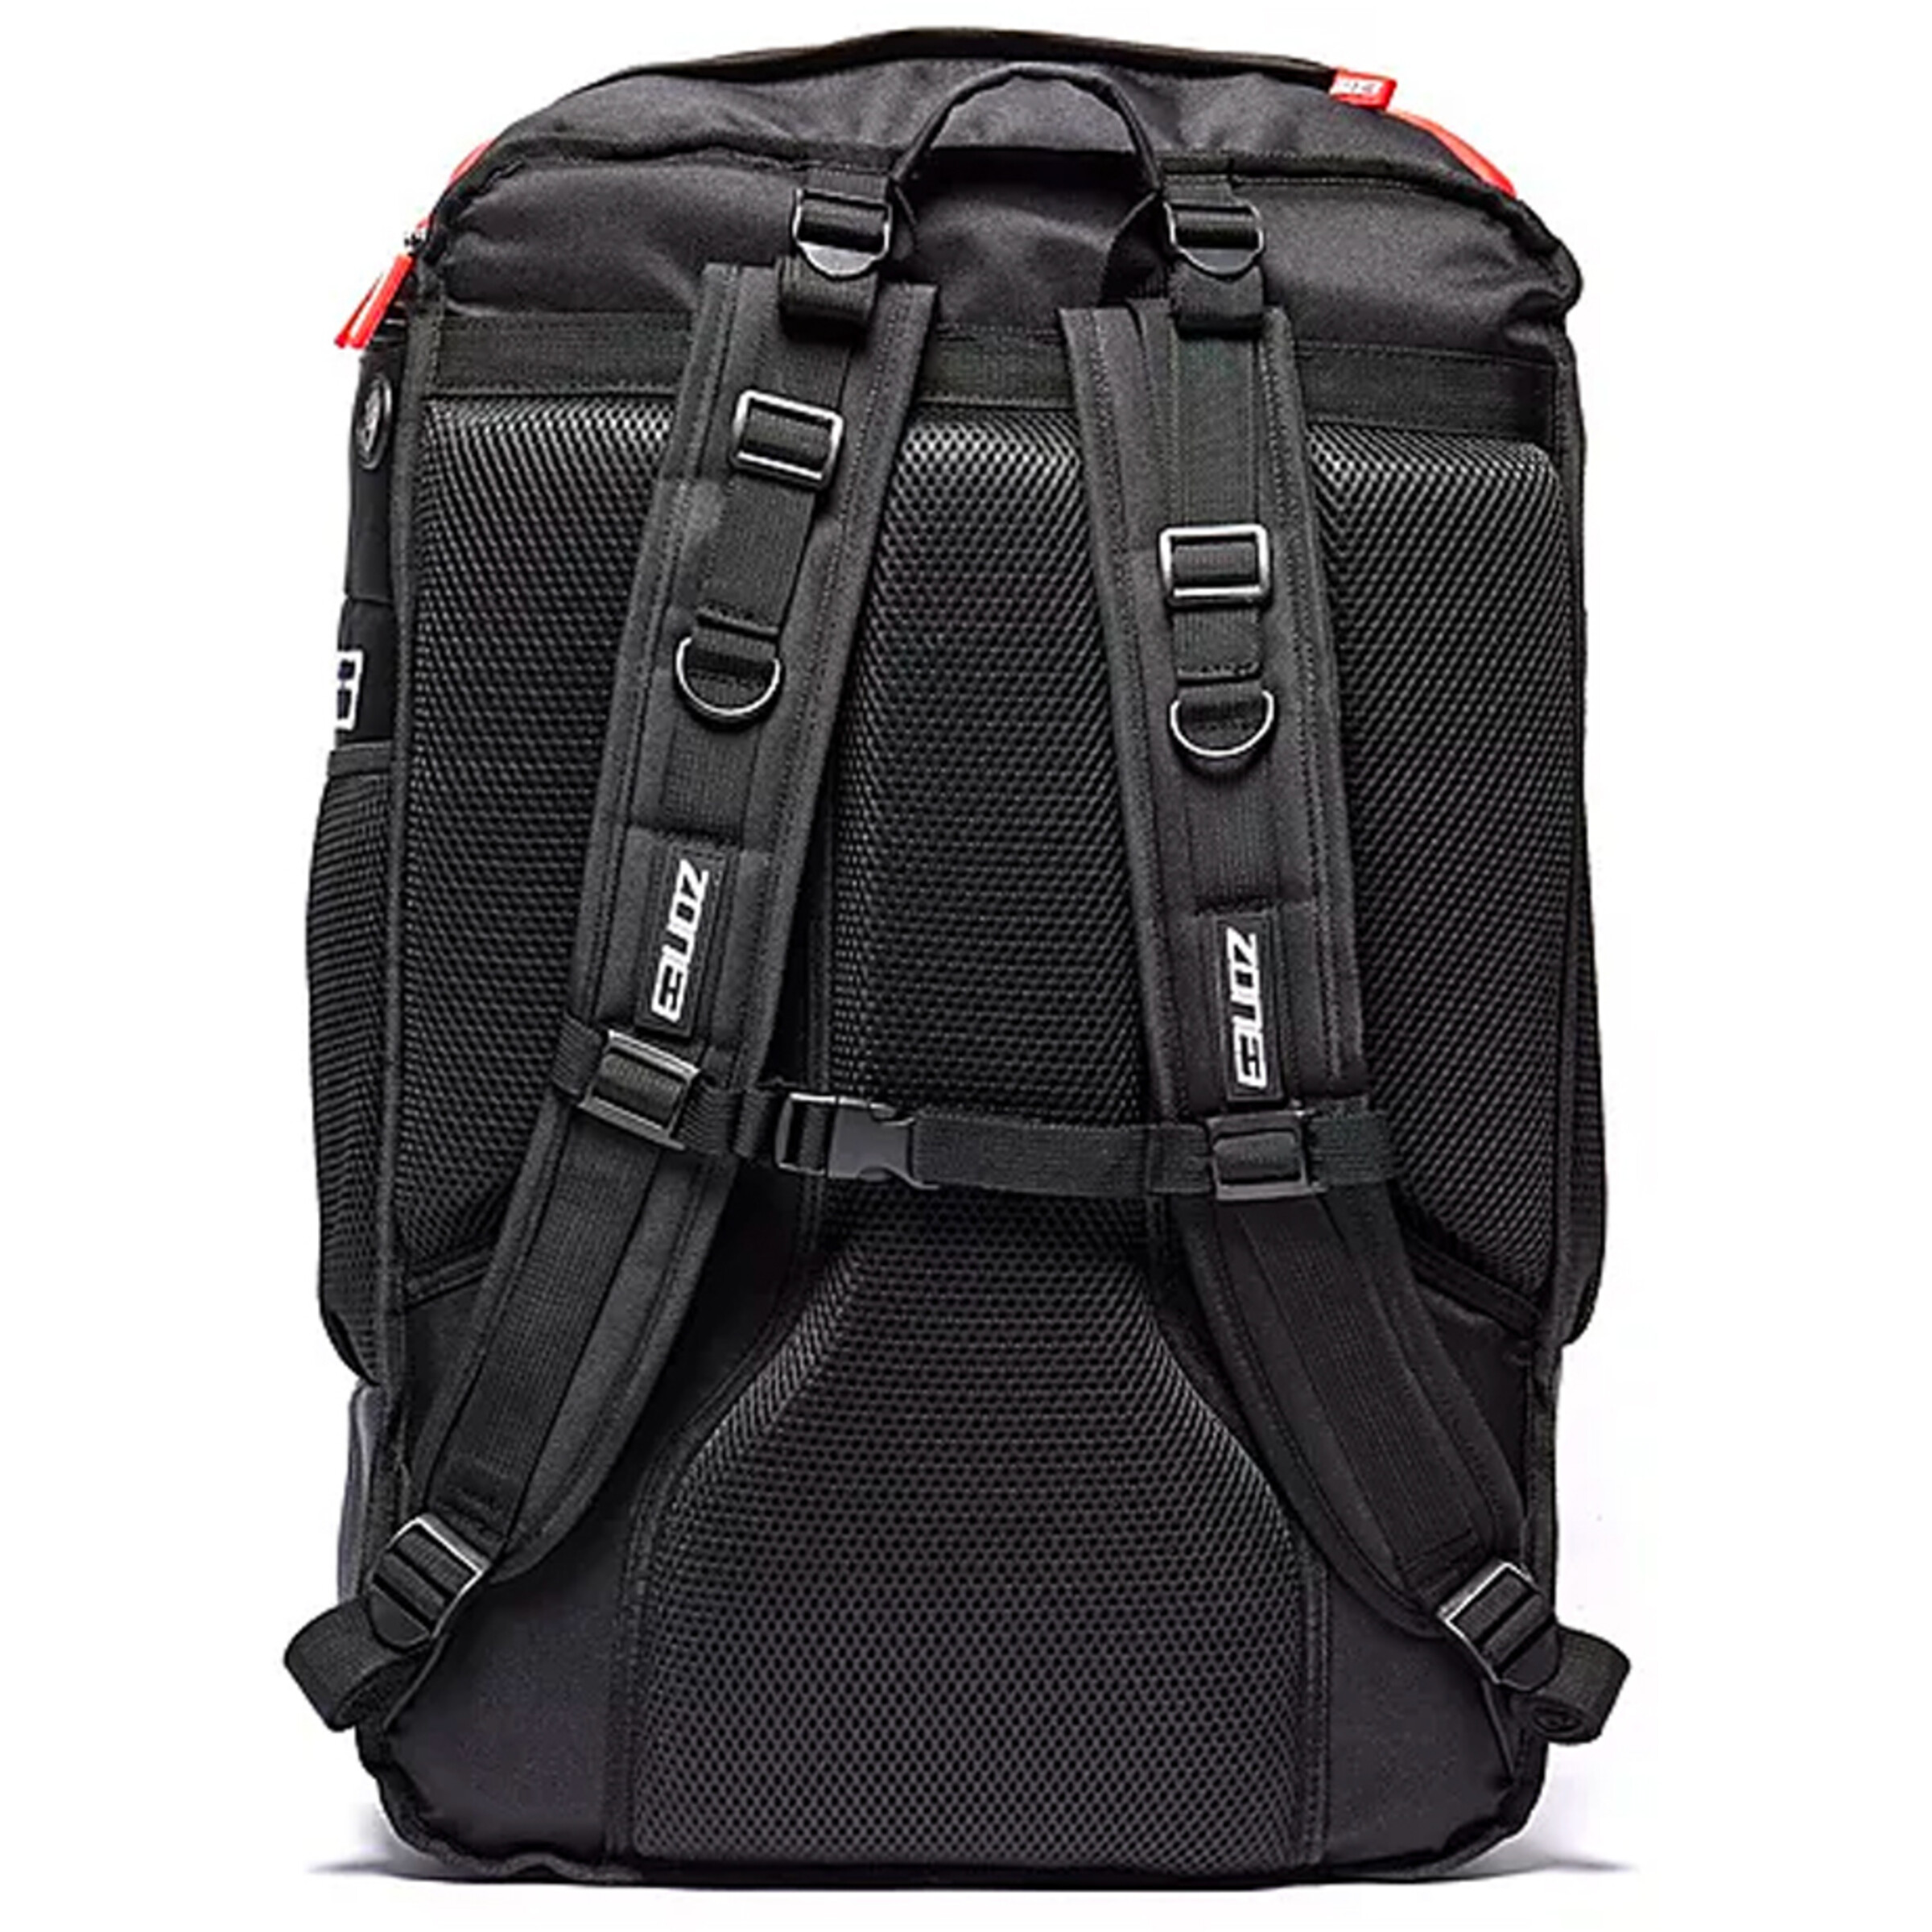 zone3-transition-backpack-with-eva-cycle-helmet-compartment-black-grey-3